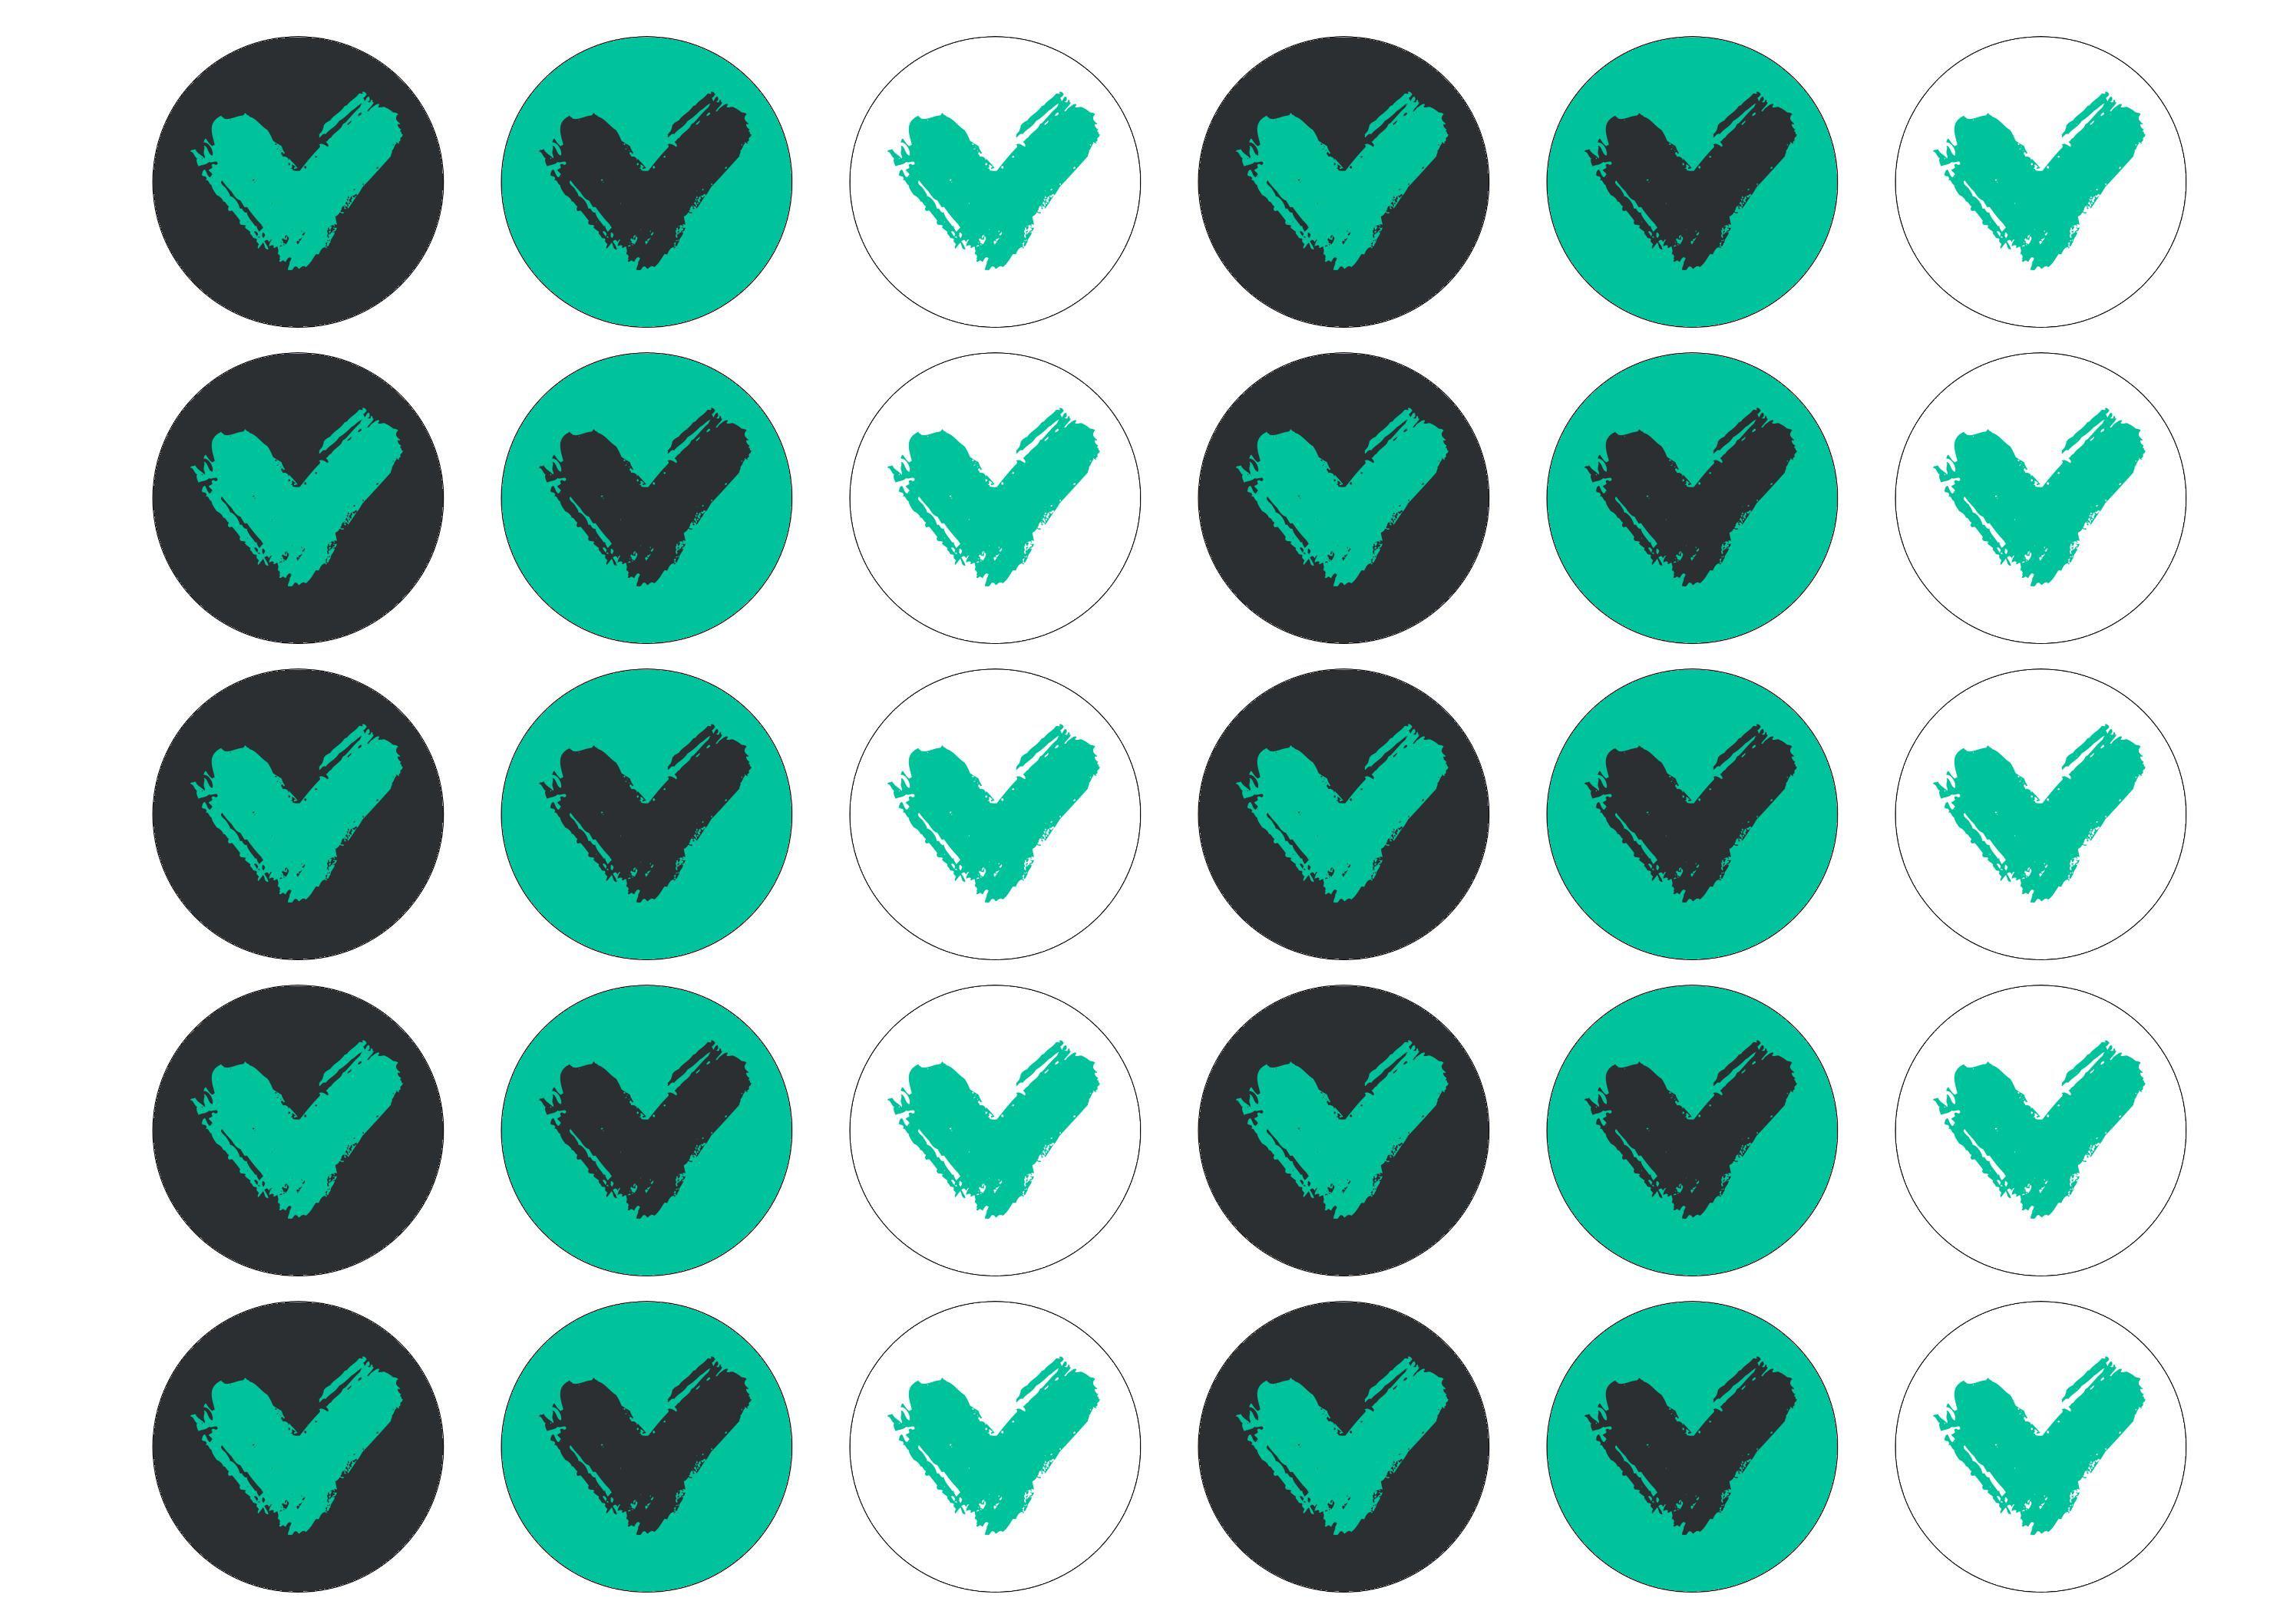 30 edible cupcake toppers with the Veganuary Green icon